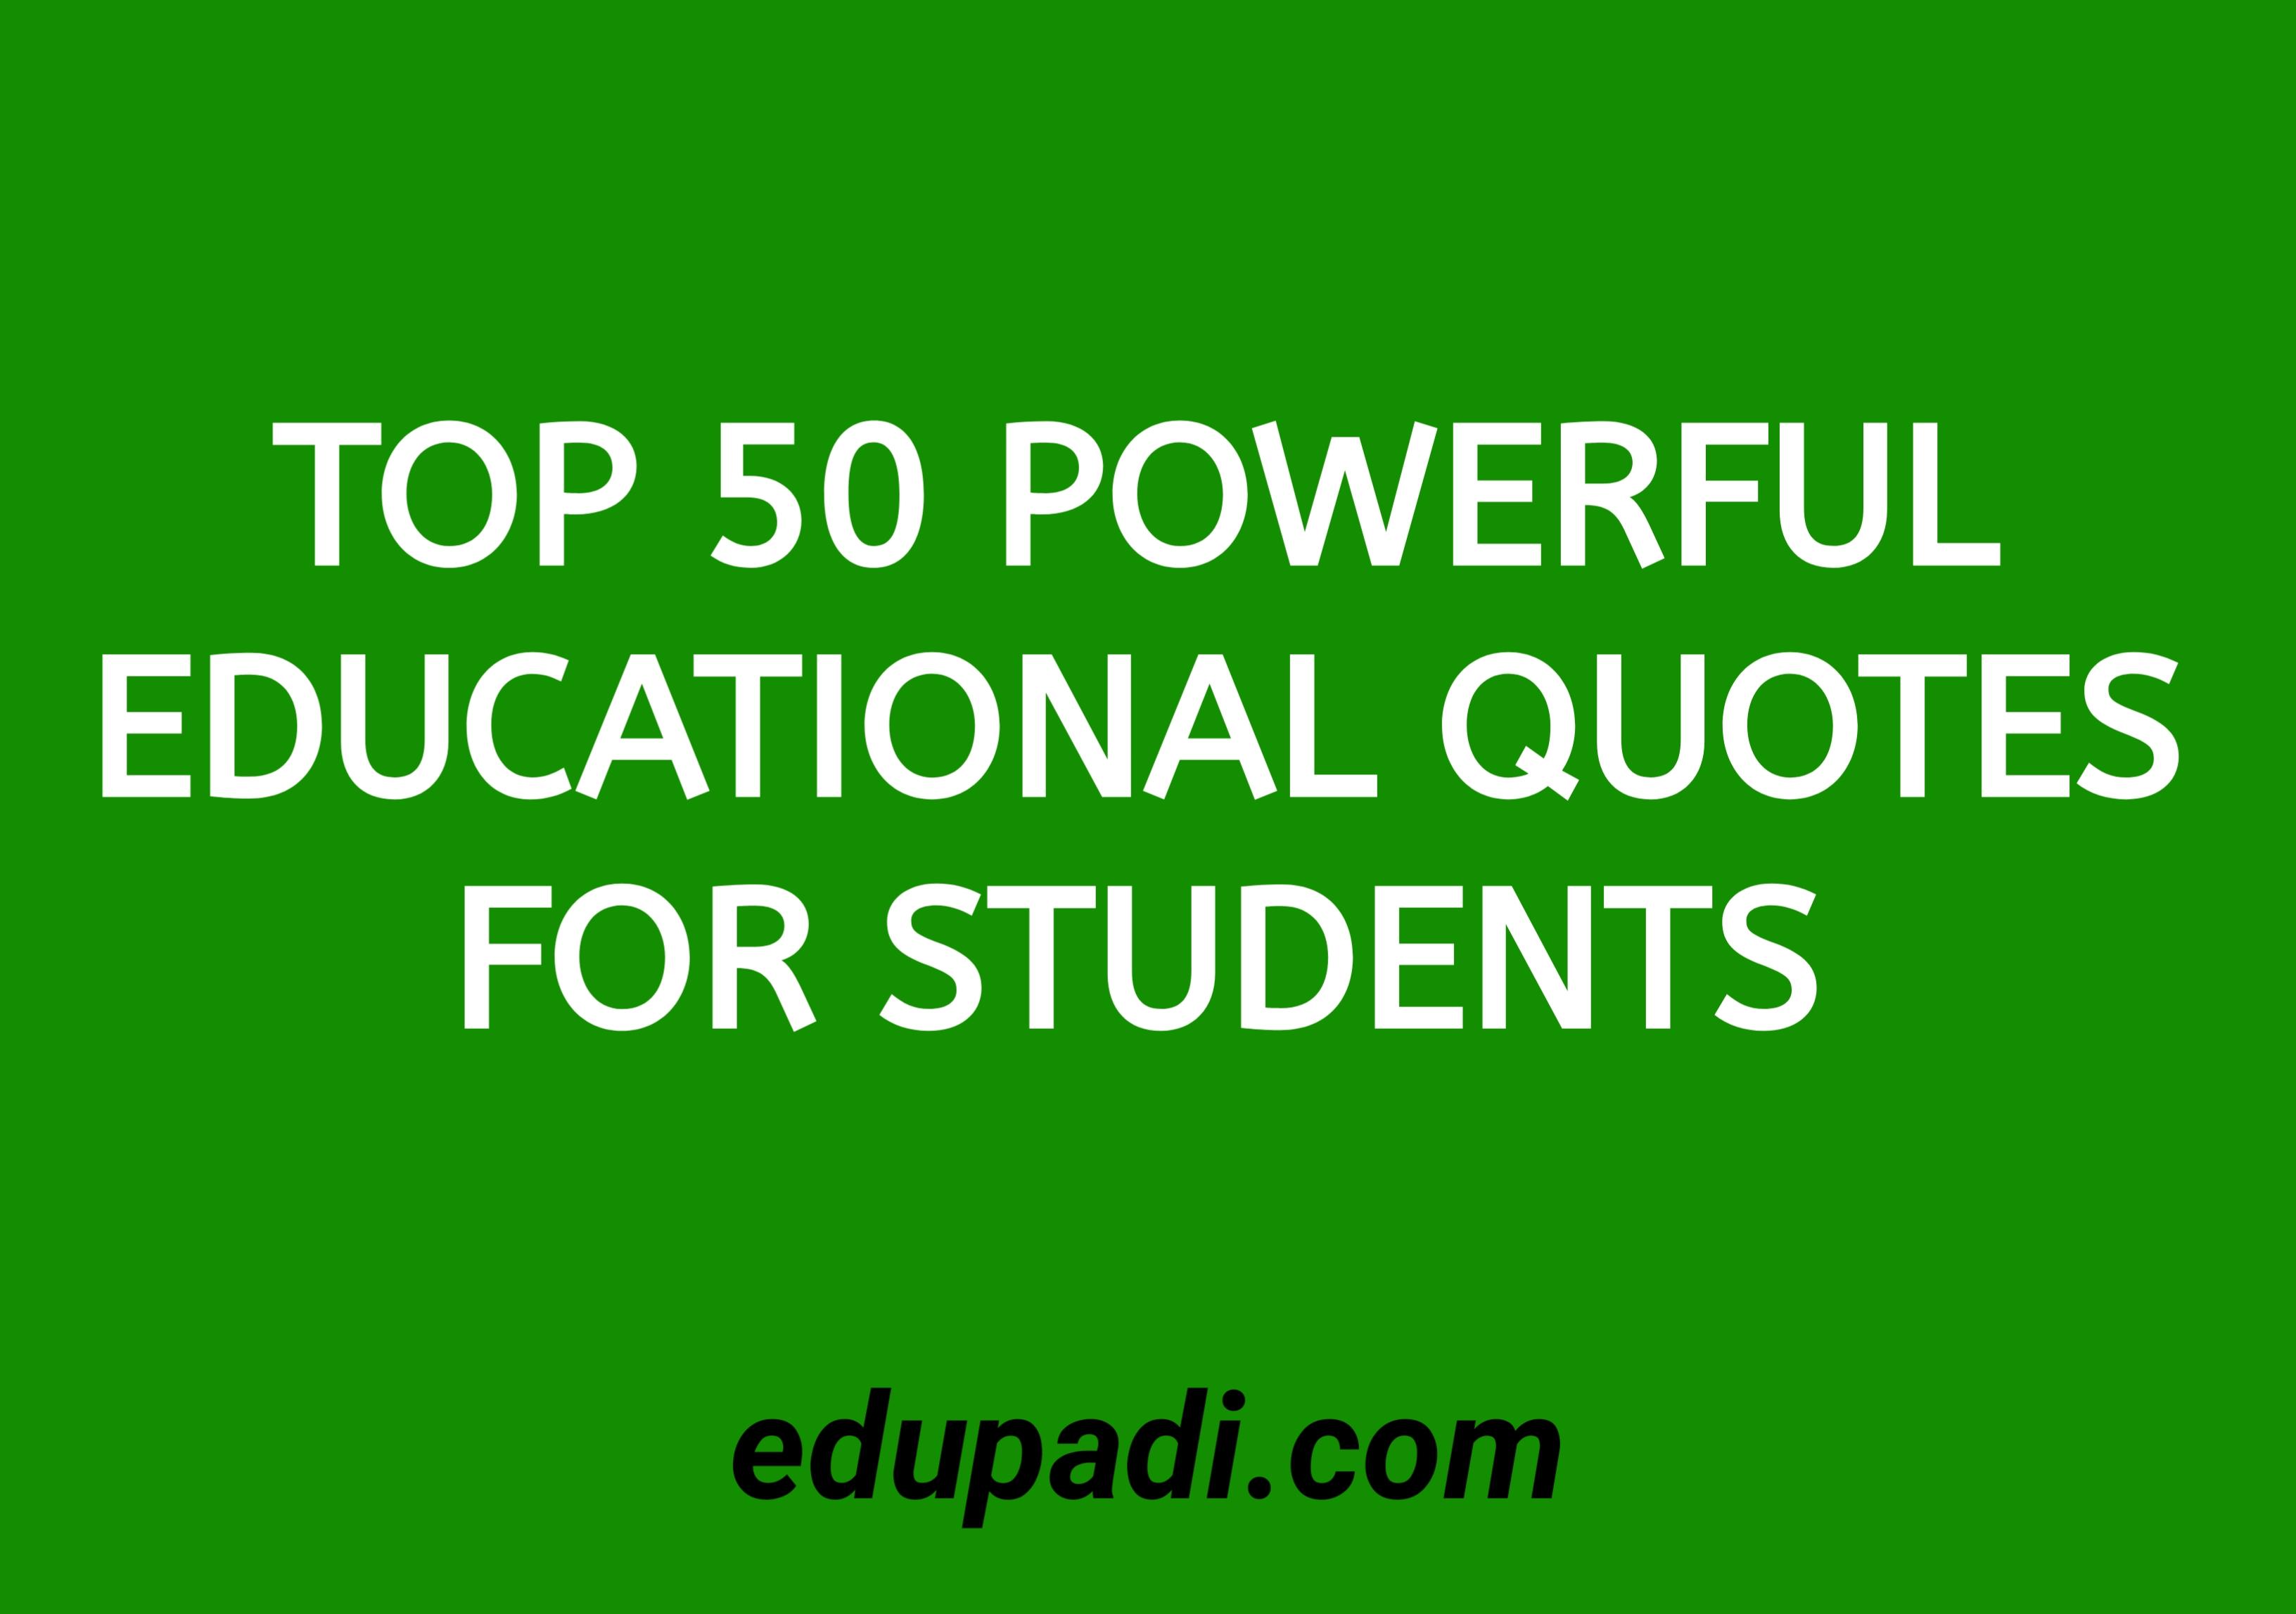 Cover Image for Top 50 Powerful Educational Quotes For Students